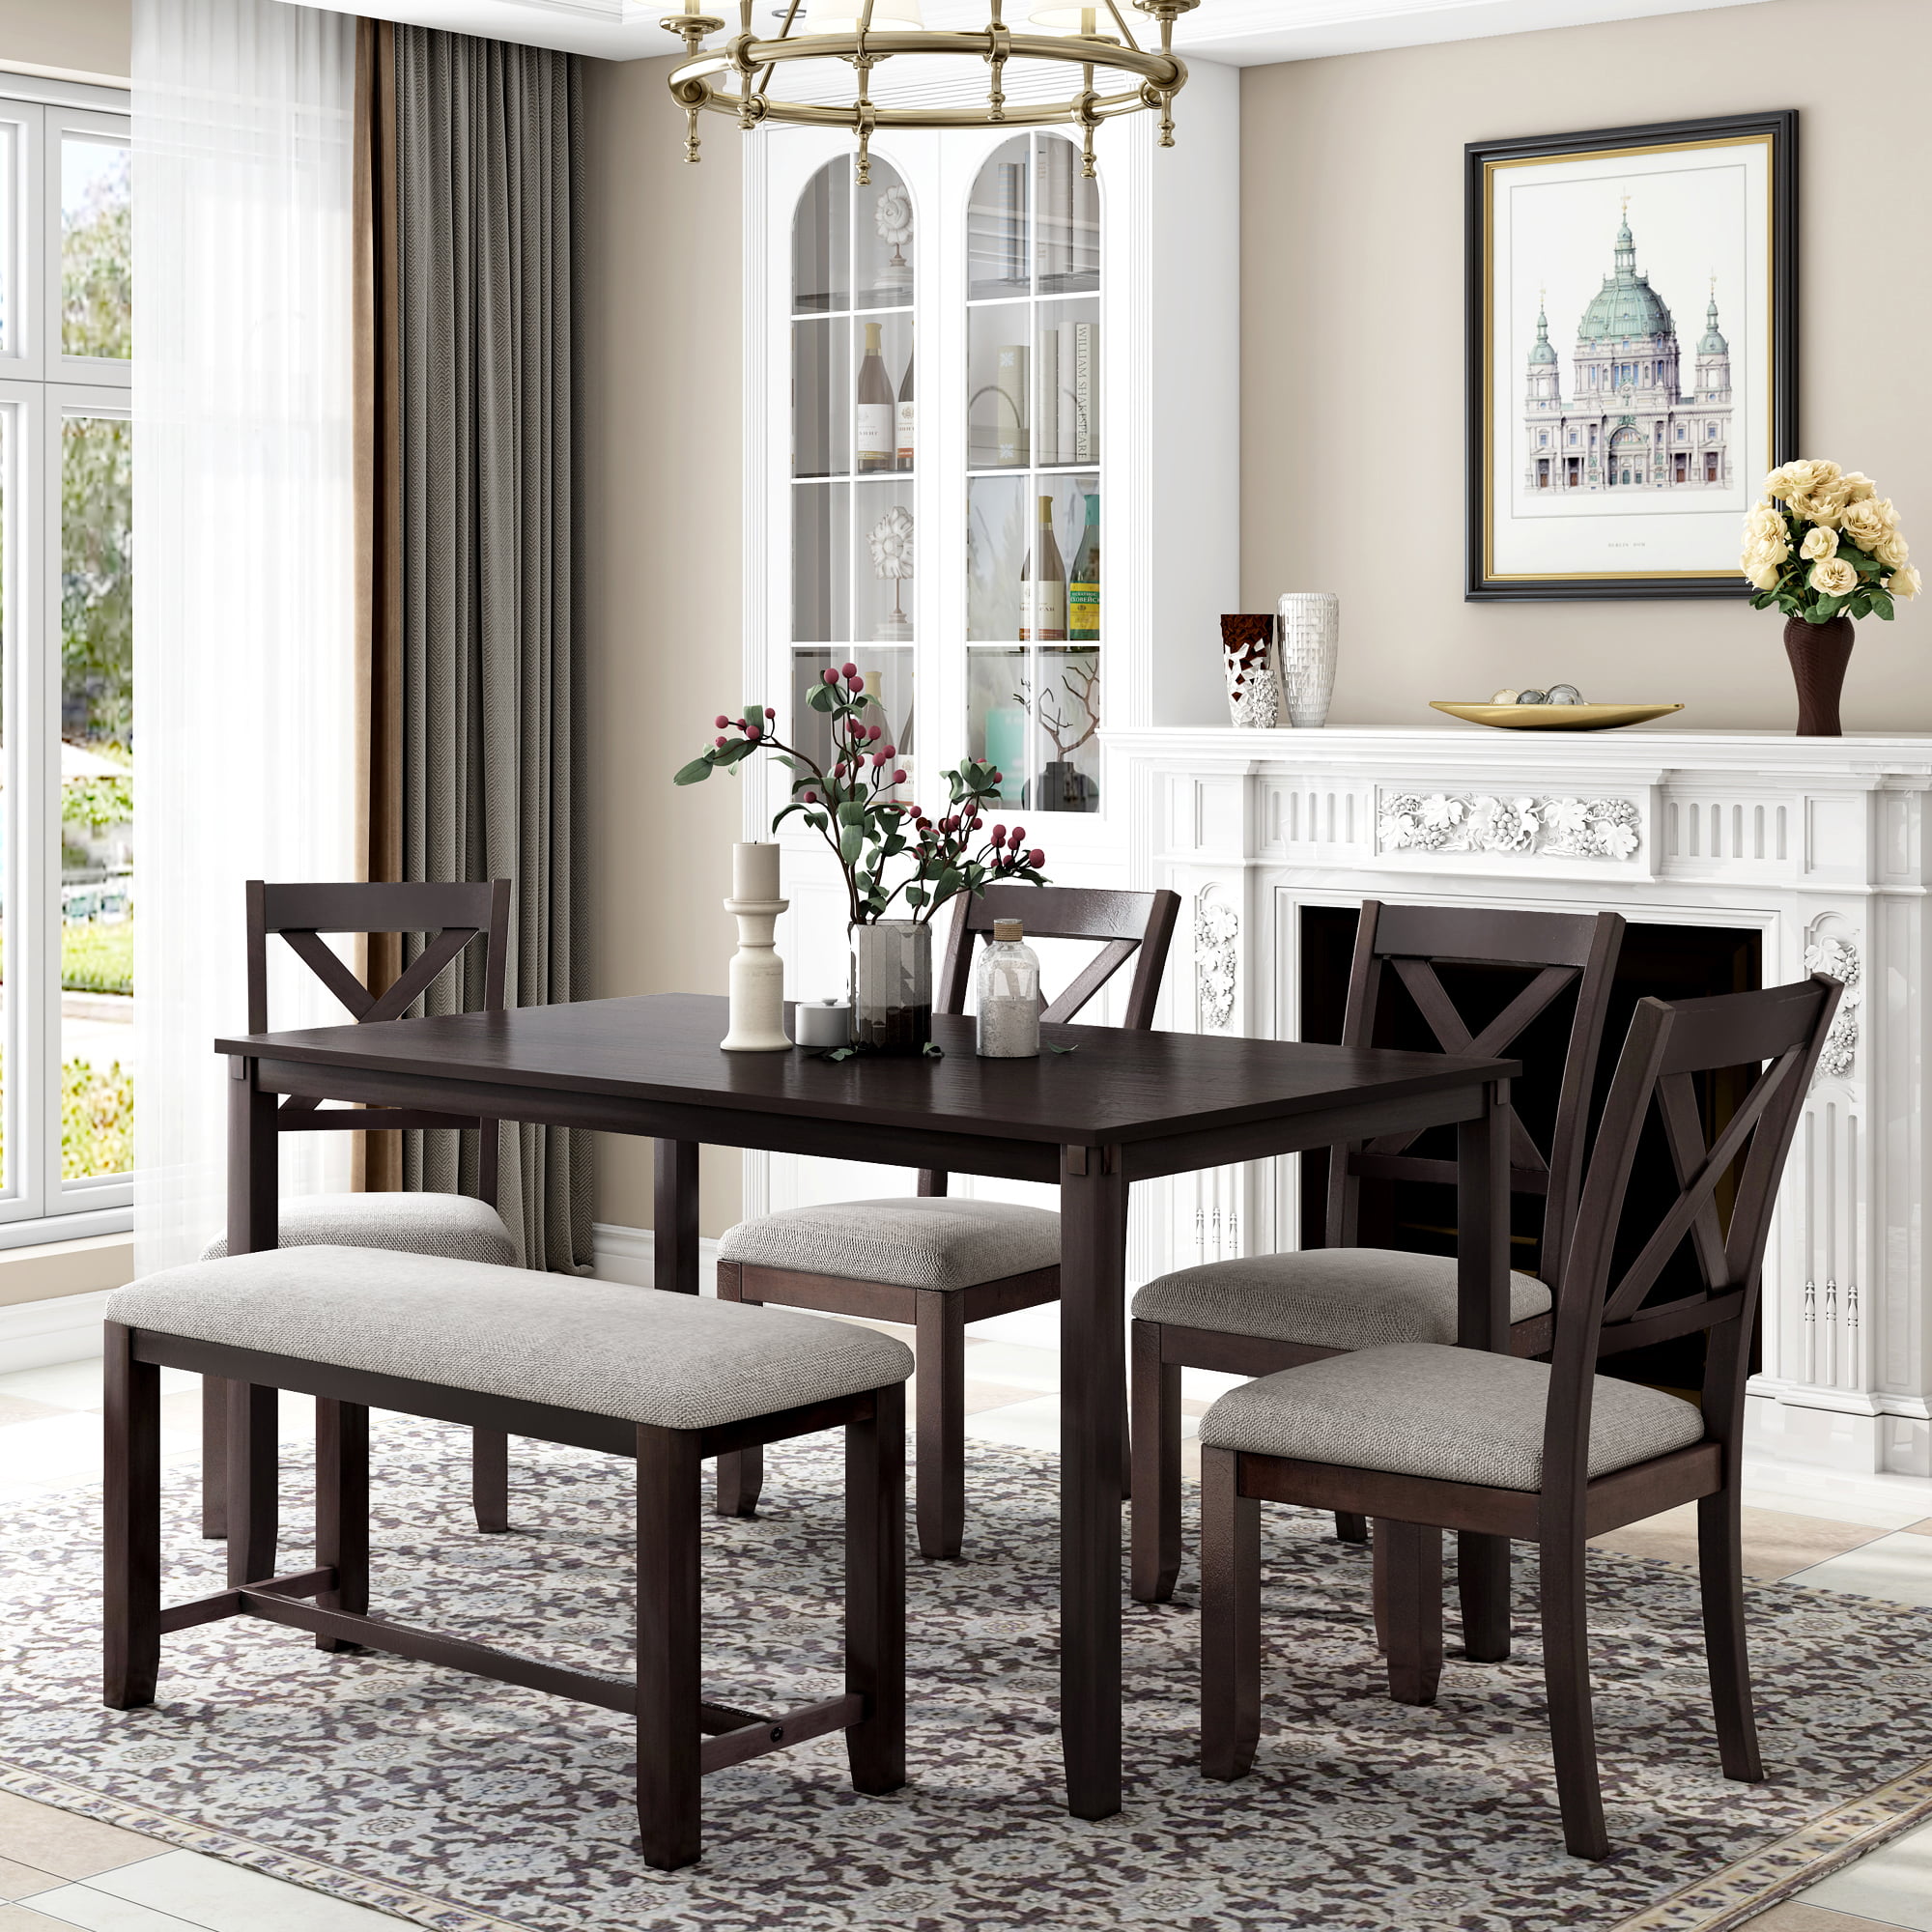 Rustic Style Dining Table Set, Apartment Dining Room Tables And Chairs For 6